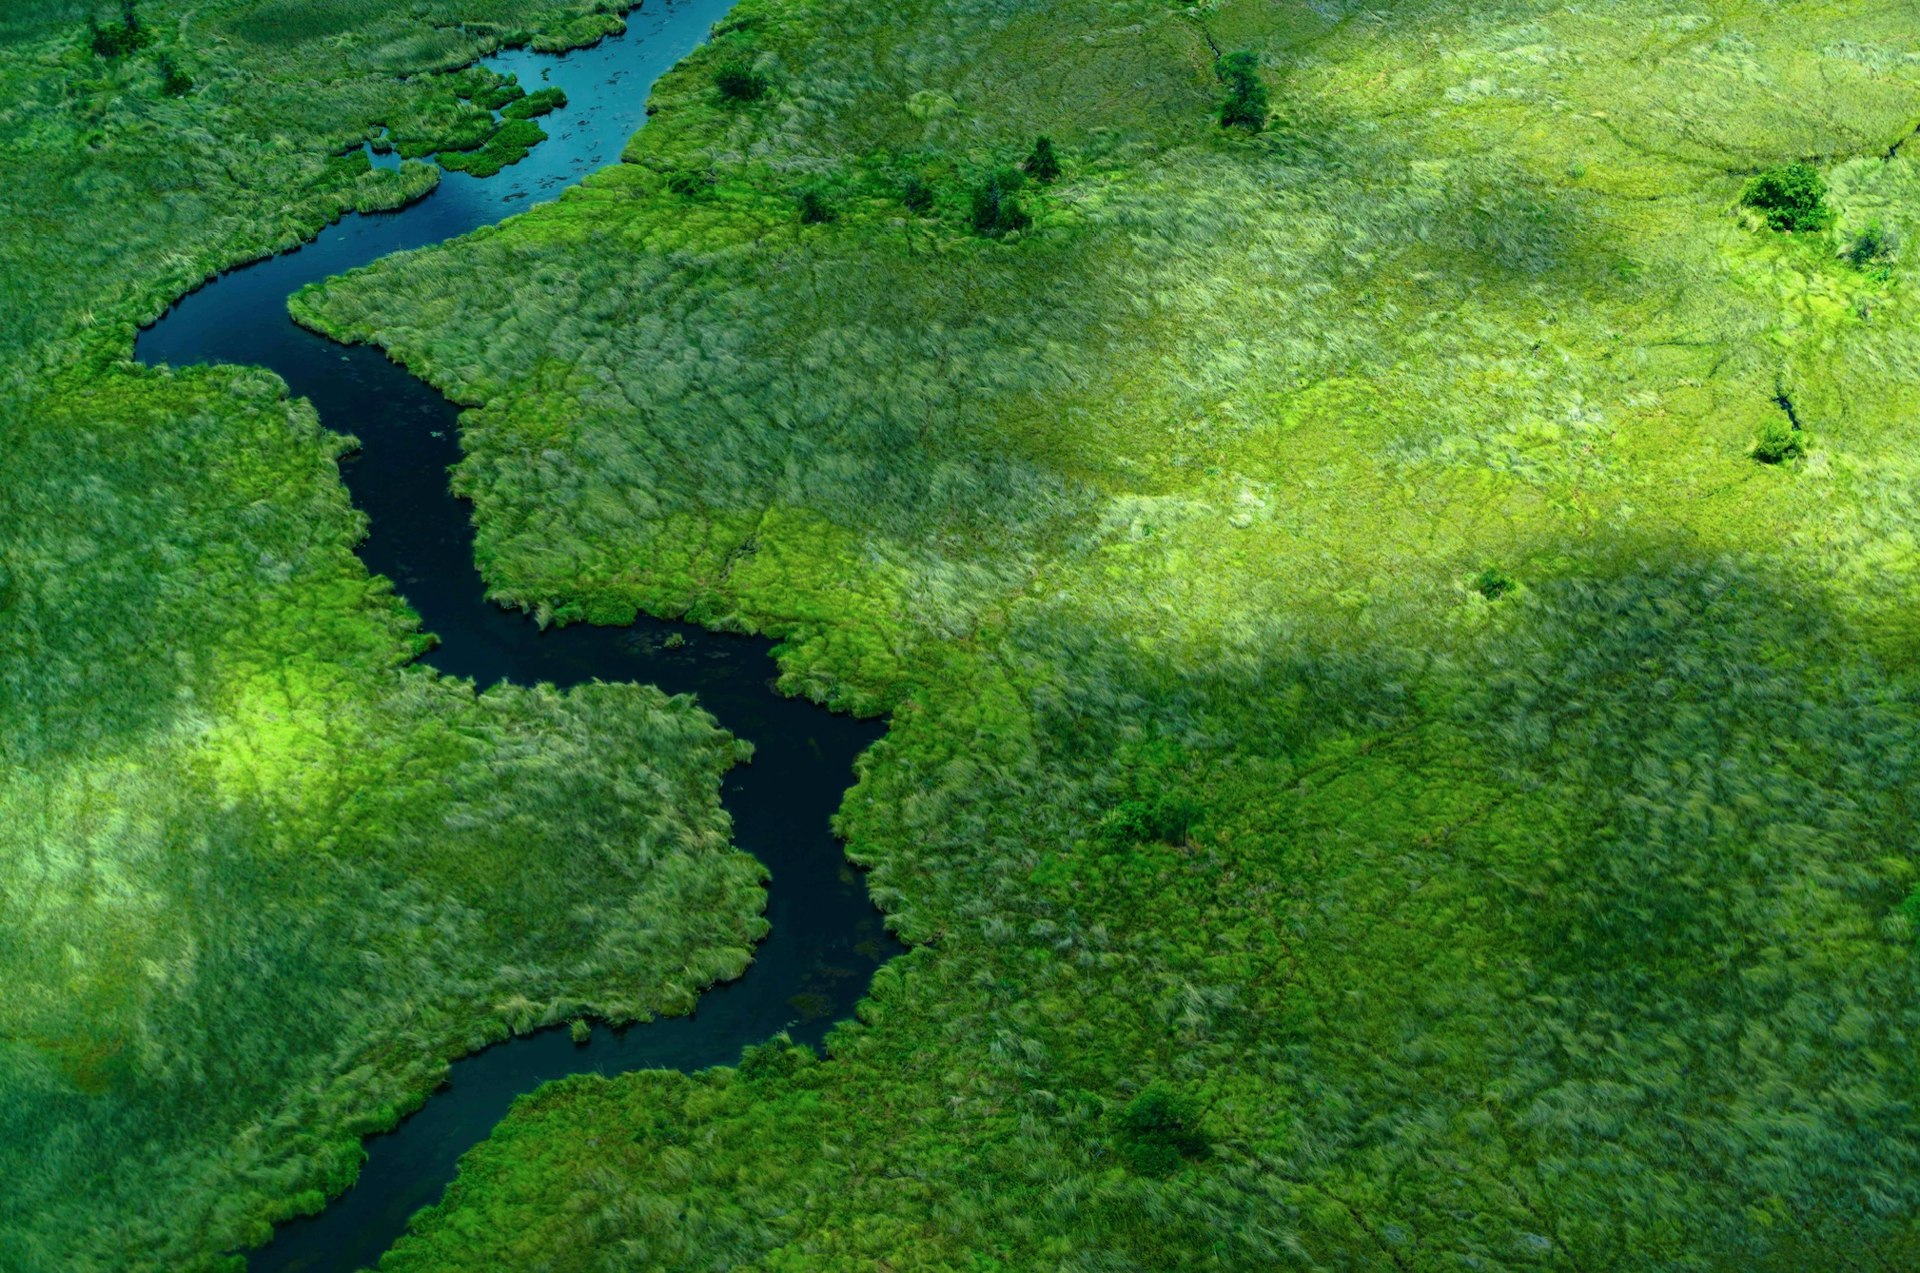 Photo by Daniel Burton. This photograph was taken in January 2016 and features a bird’s-eye view of the approach to the Moremi Game Reserve in Botswana’s Okavango Delta region. Moremi is cut off from the remainder of the Delta and travel to and from its lodges requires transit by light aircraft or helicopter. The shot was taken from a Cessna plane and shows one of the many ephemeral tributaries of the Okavango basin which snake through the landscape following the annual discharge of rain from the Angolan highlands.